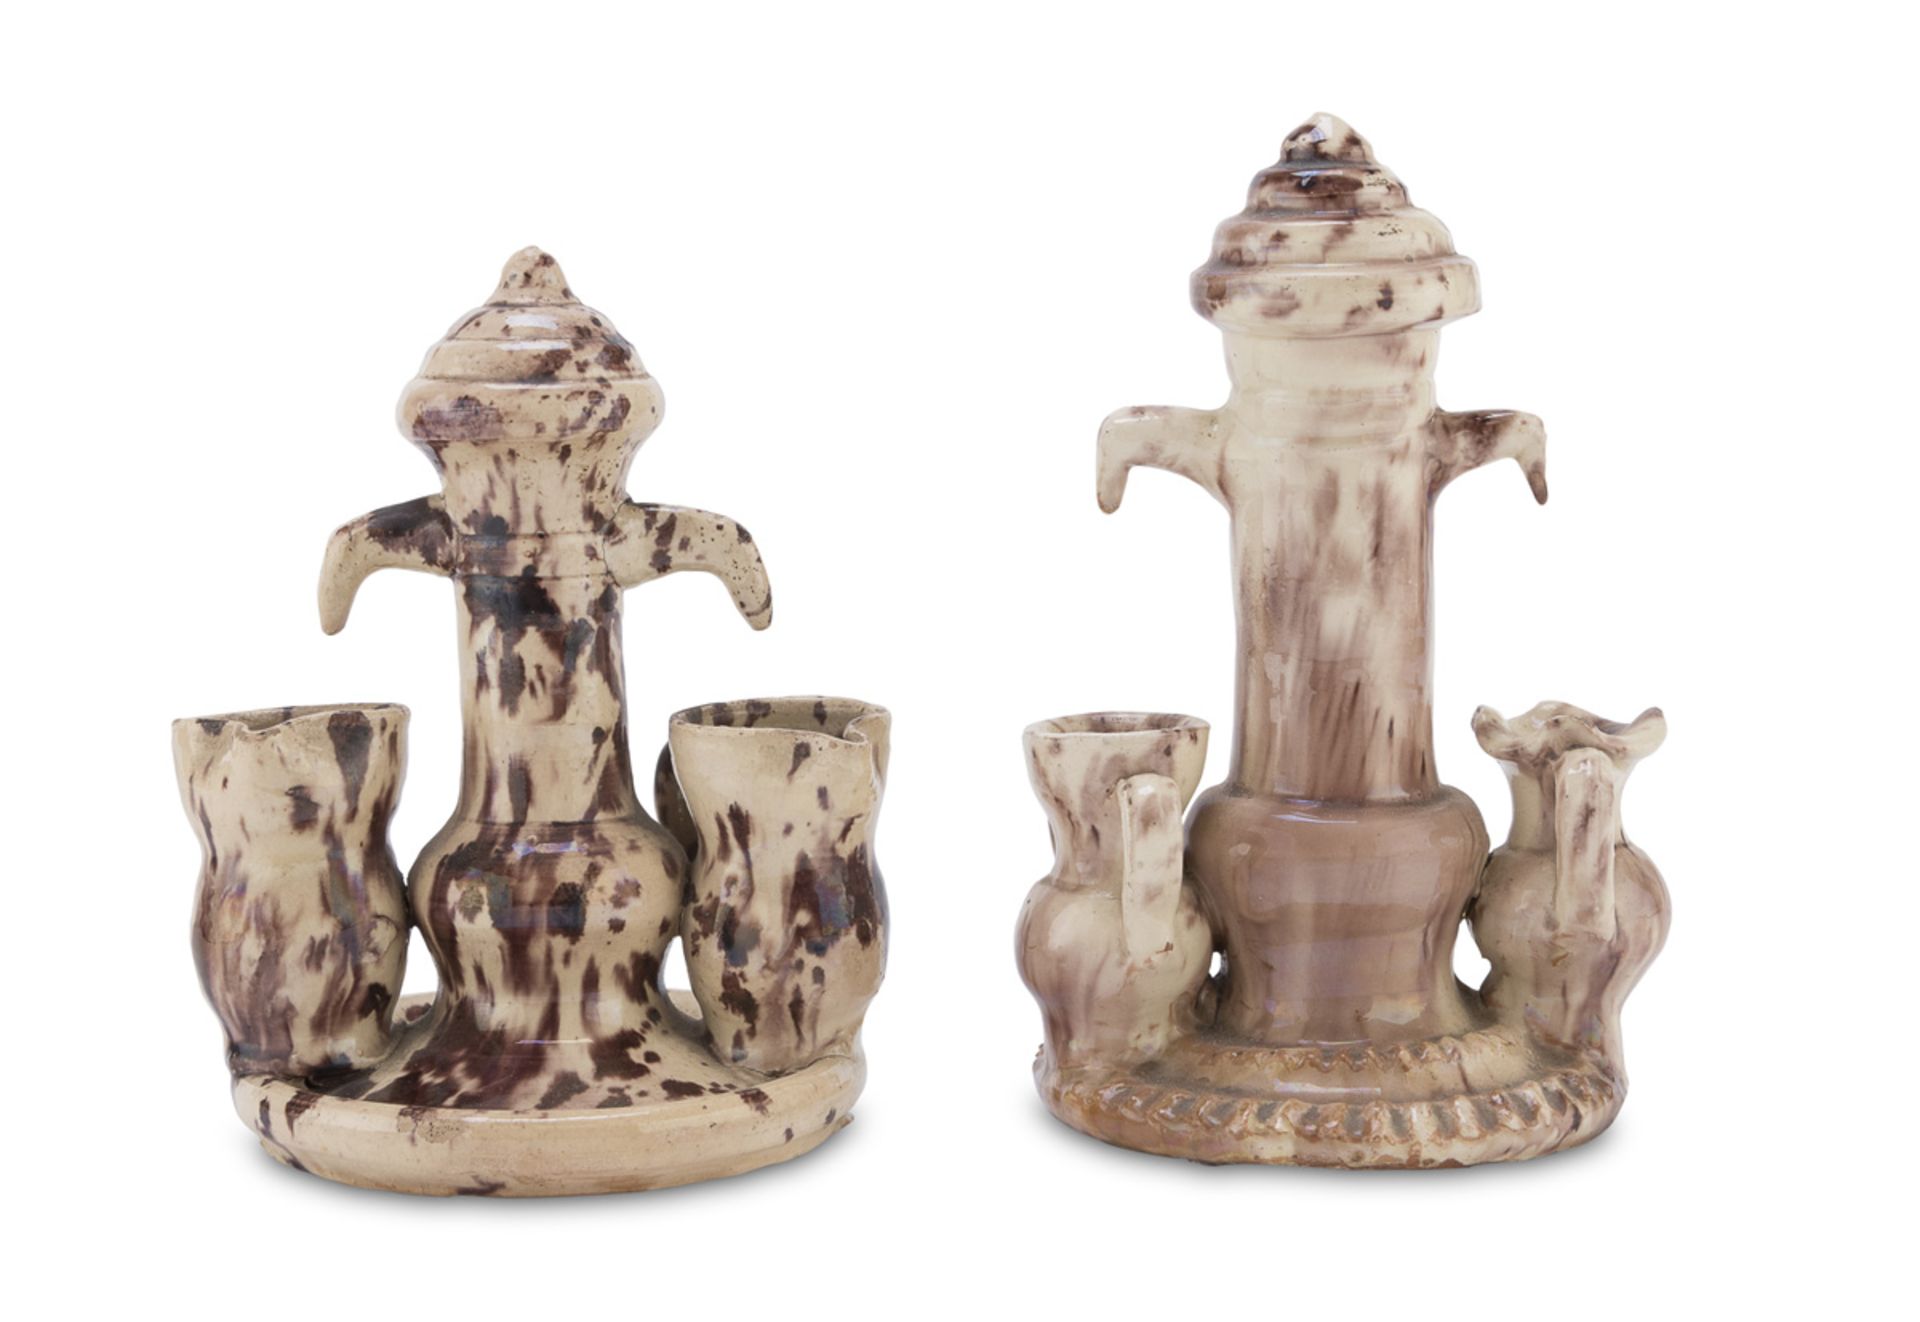 A OF OF FOUNTAIN MODELS IN CERAMICS GROTTAGLIE 19TH CENTURY